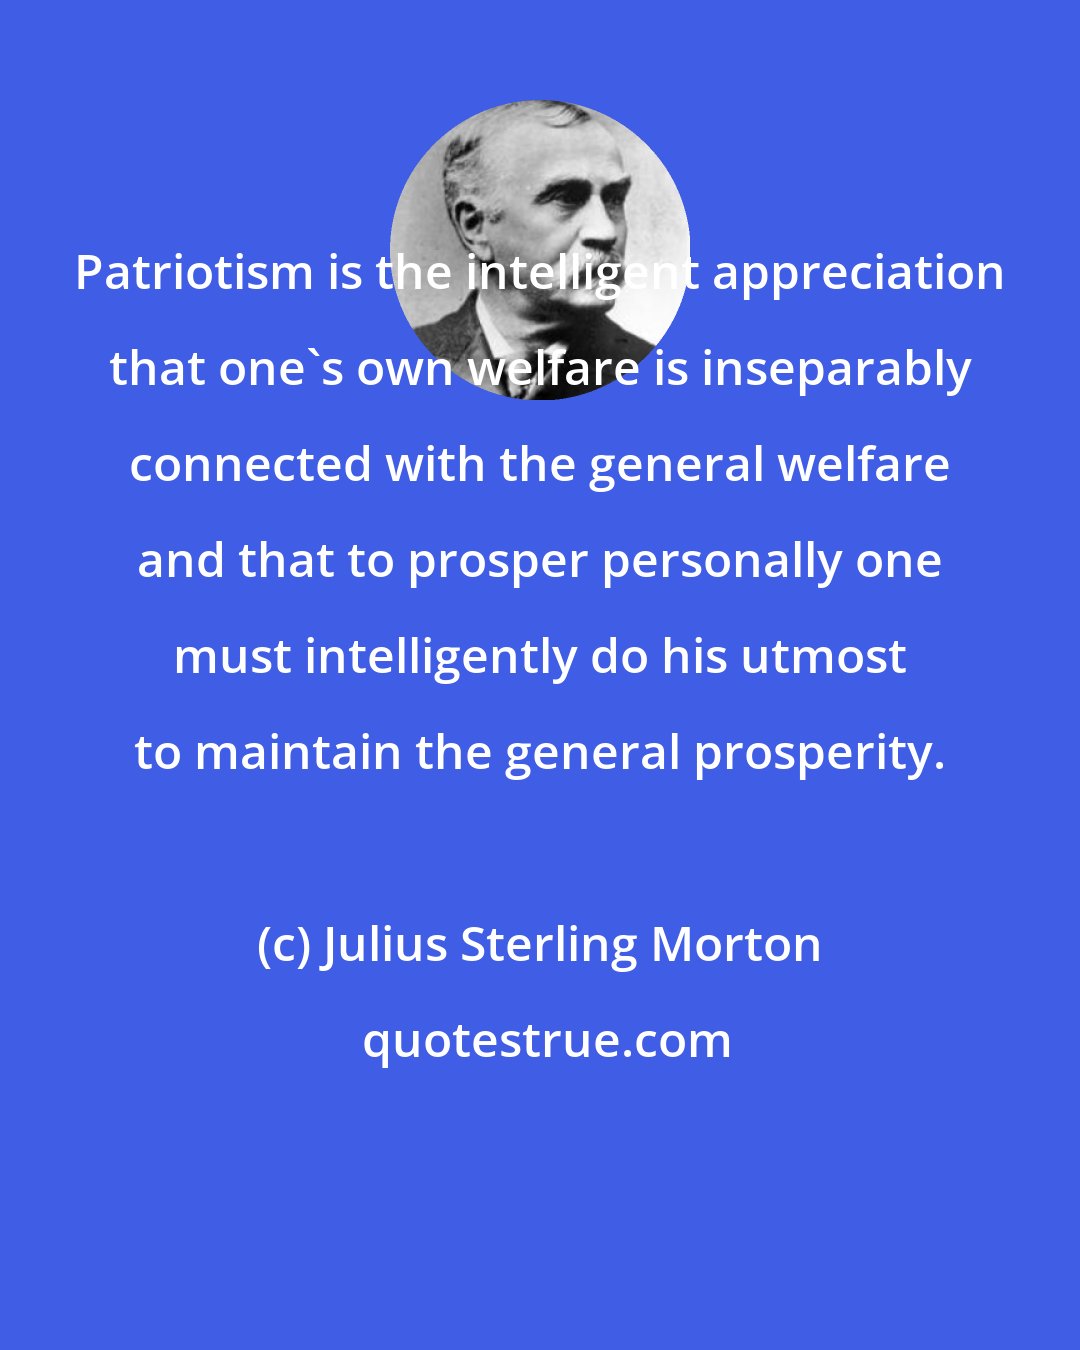 Julius Sterling Morton: Patriotism is the intelligent appreciation that one's own welfare is inseparably connected with the general welfare and that to prosper personally one must intelligently do his utmost to maintain the general prosperity.